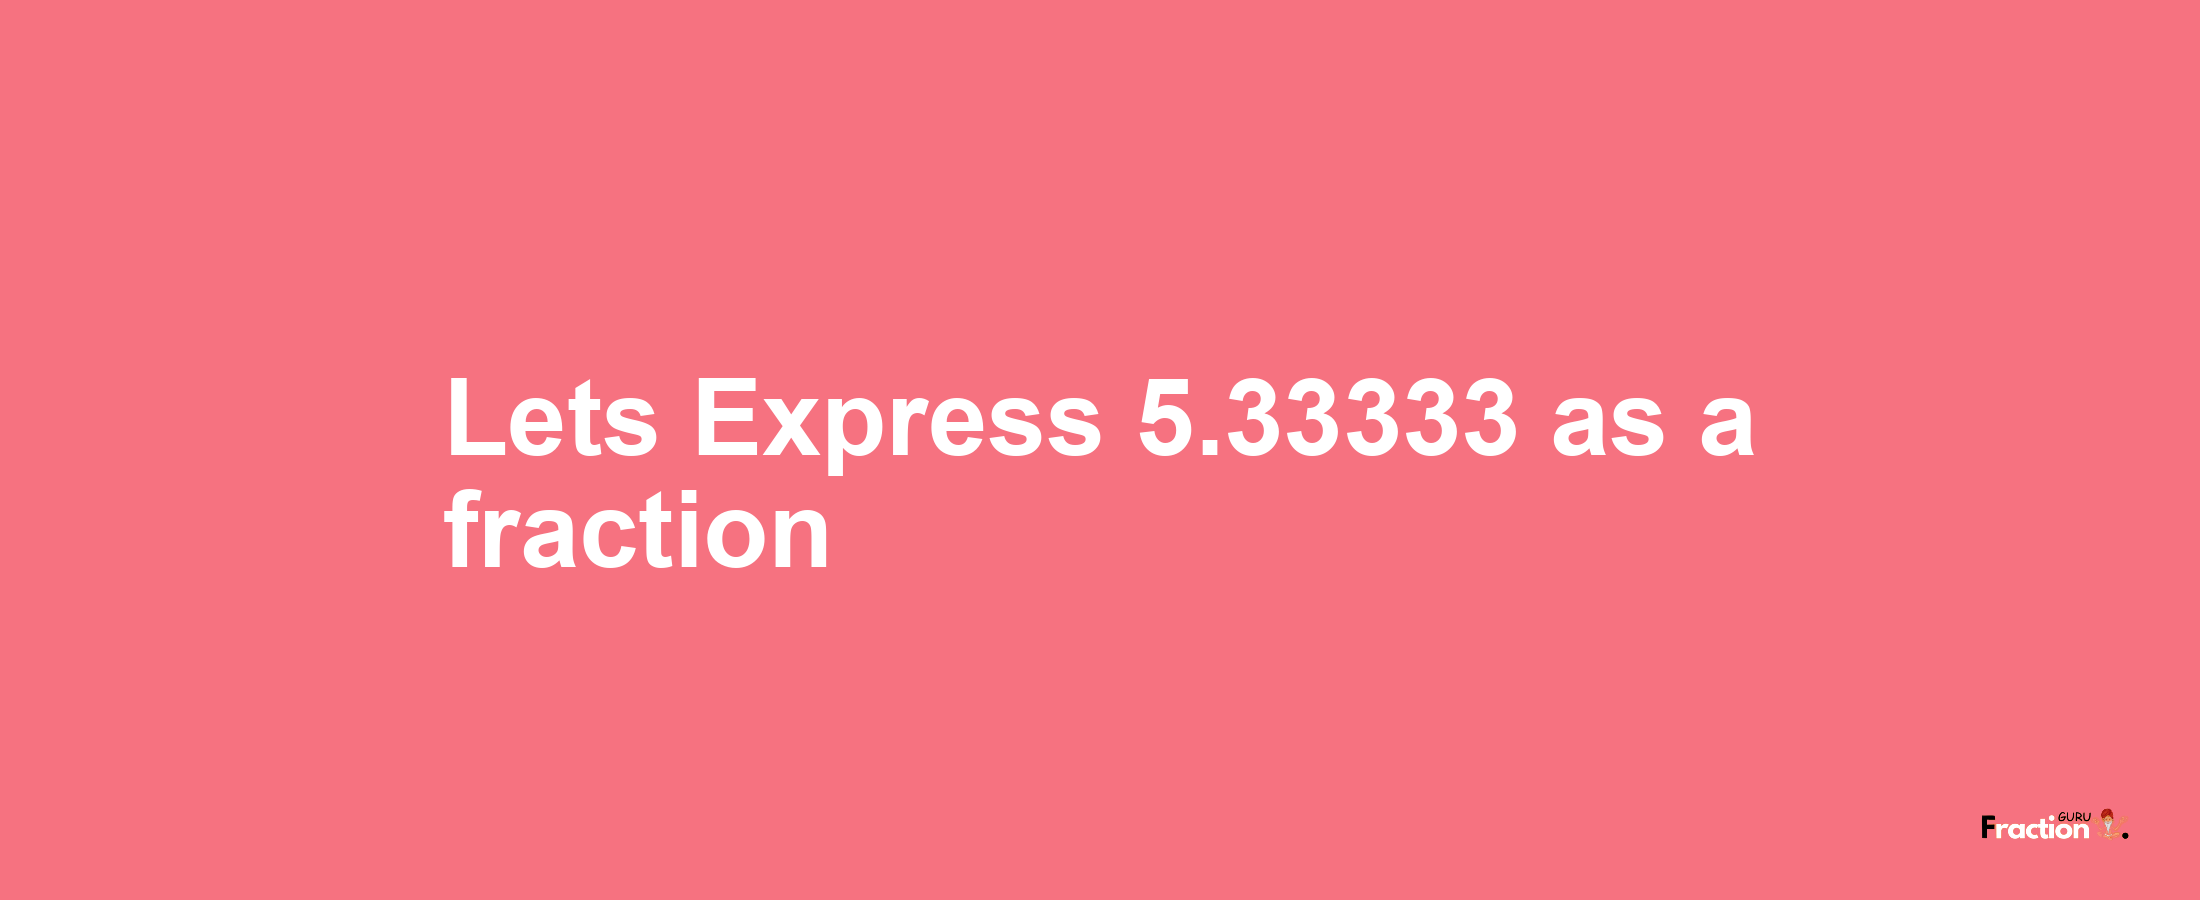 Lets Express 5.33333 as afraction